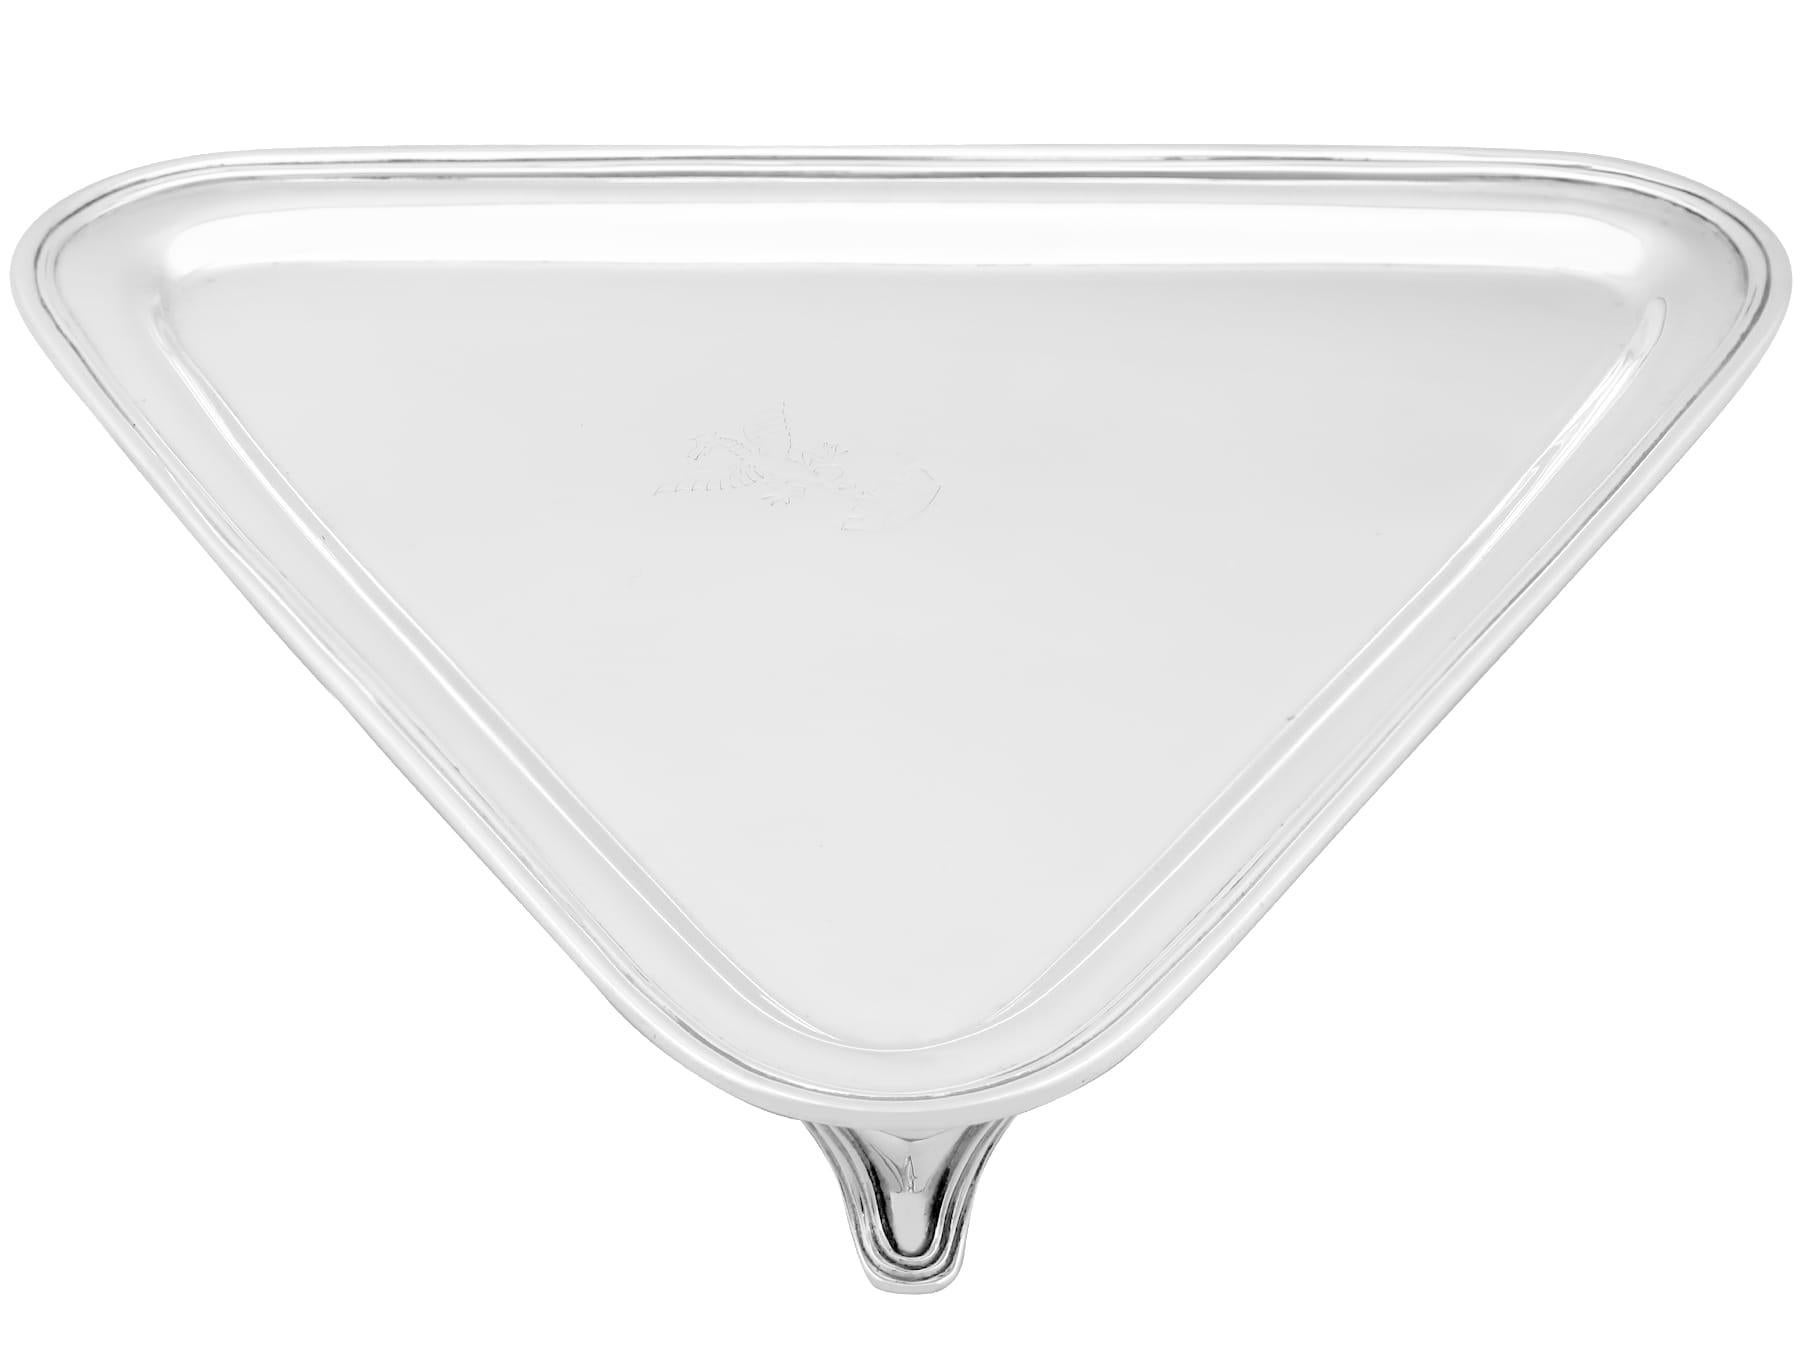 Antique Edwardian Sterling Silver Triangular Salver In Excellent Condition For Sale In Jesmond, Newcastle Upon Tyne